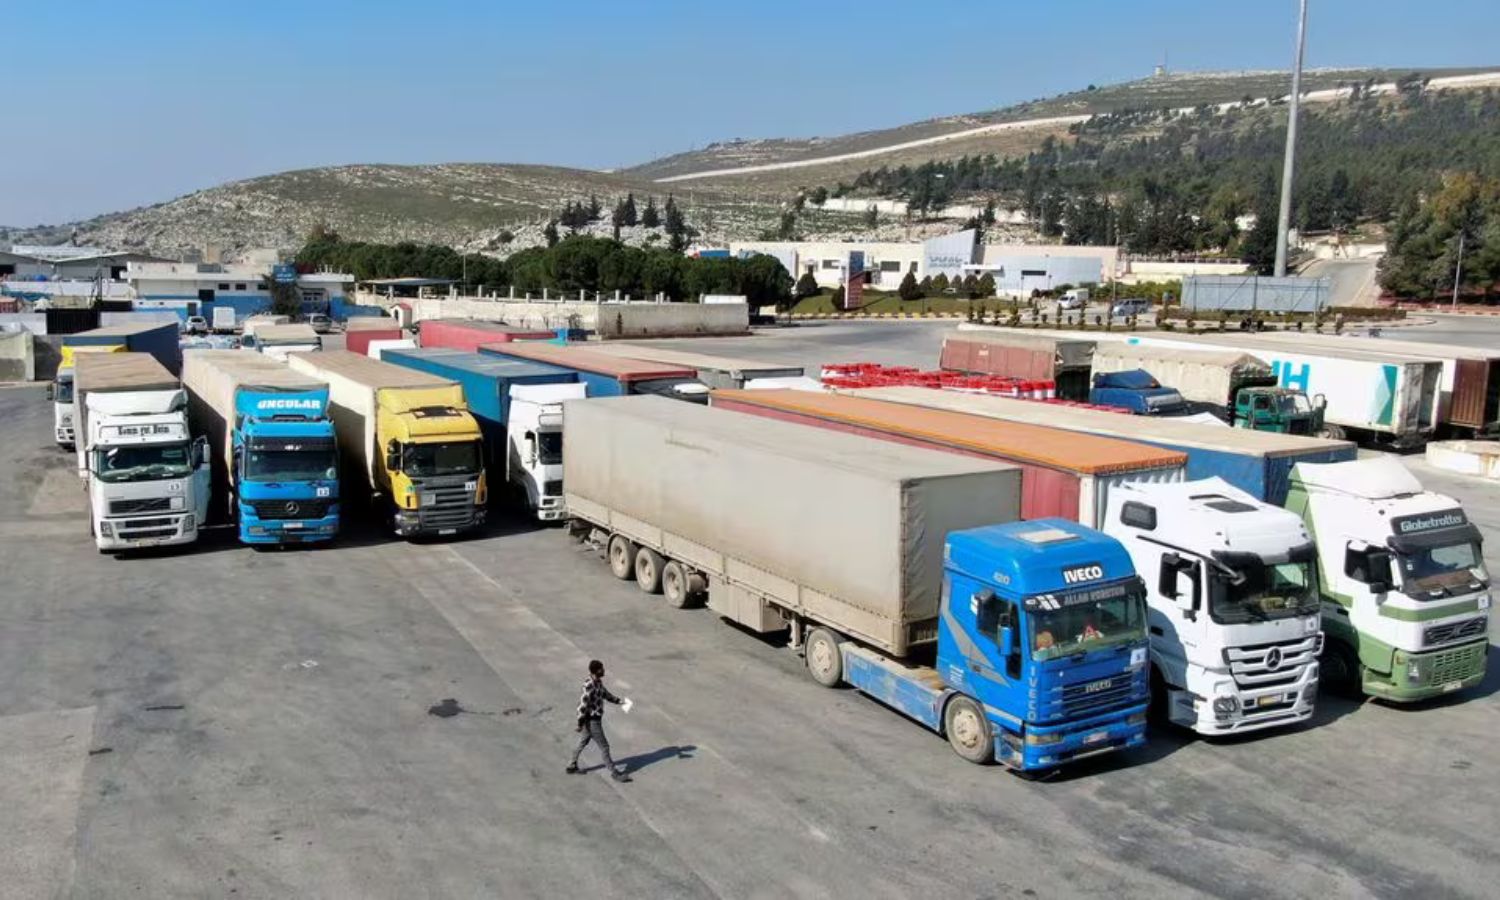 Trucks carrying aid from the UN World Food Programme (WFP) are stopped at the Bab al-Hawa crossing - February 20, 2023 (Reuters)